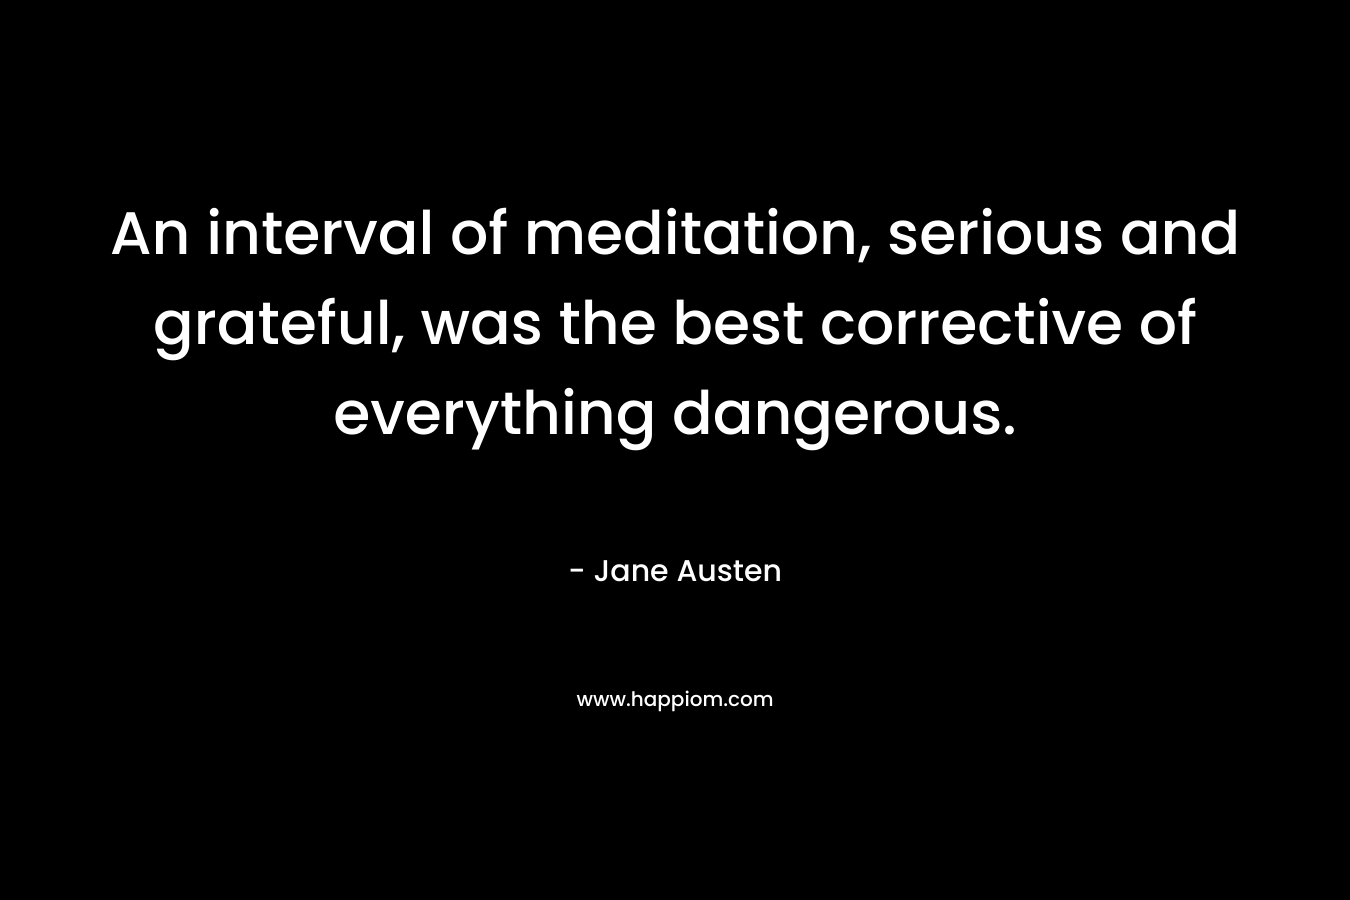 An interval of meditation, serious and grateful, was the best corrective of everything dangerous.